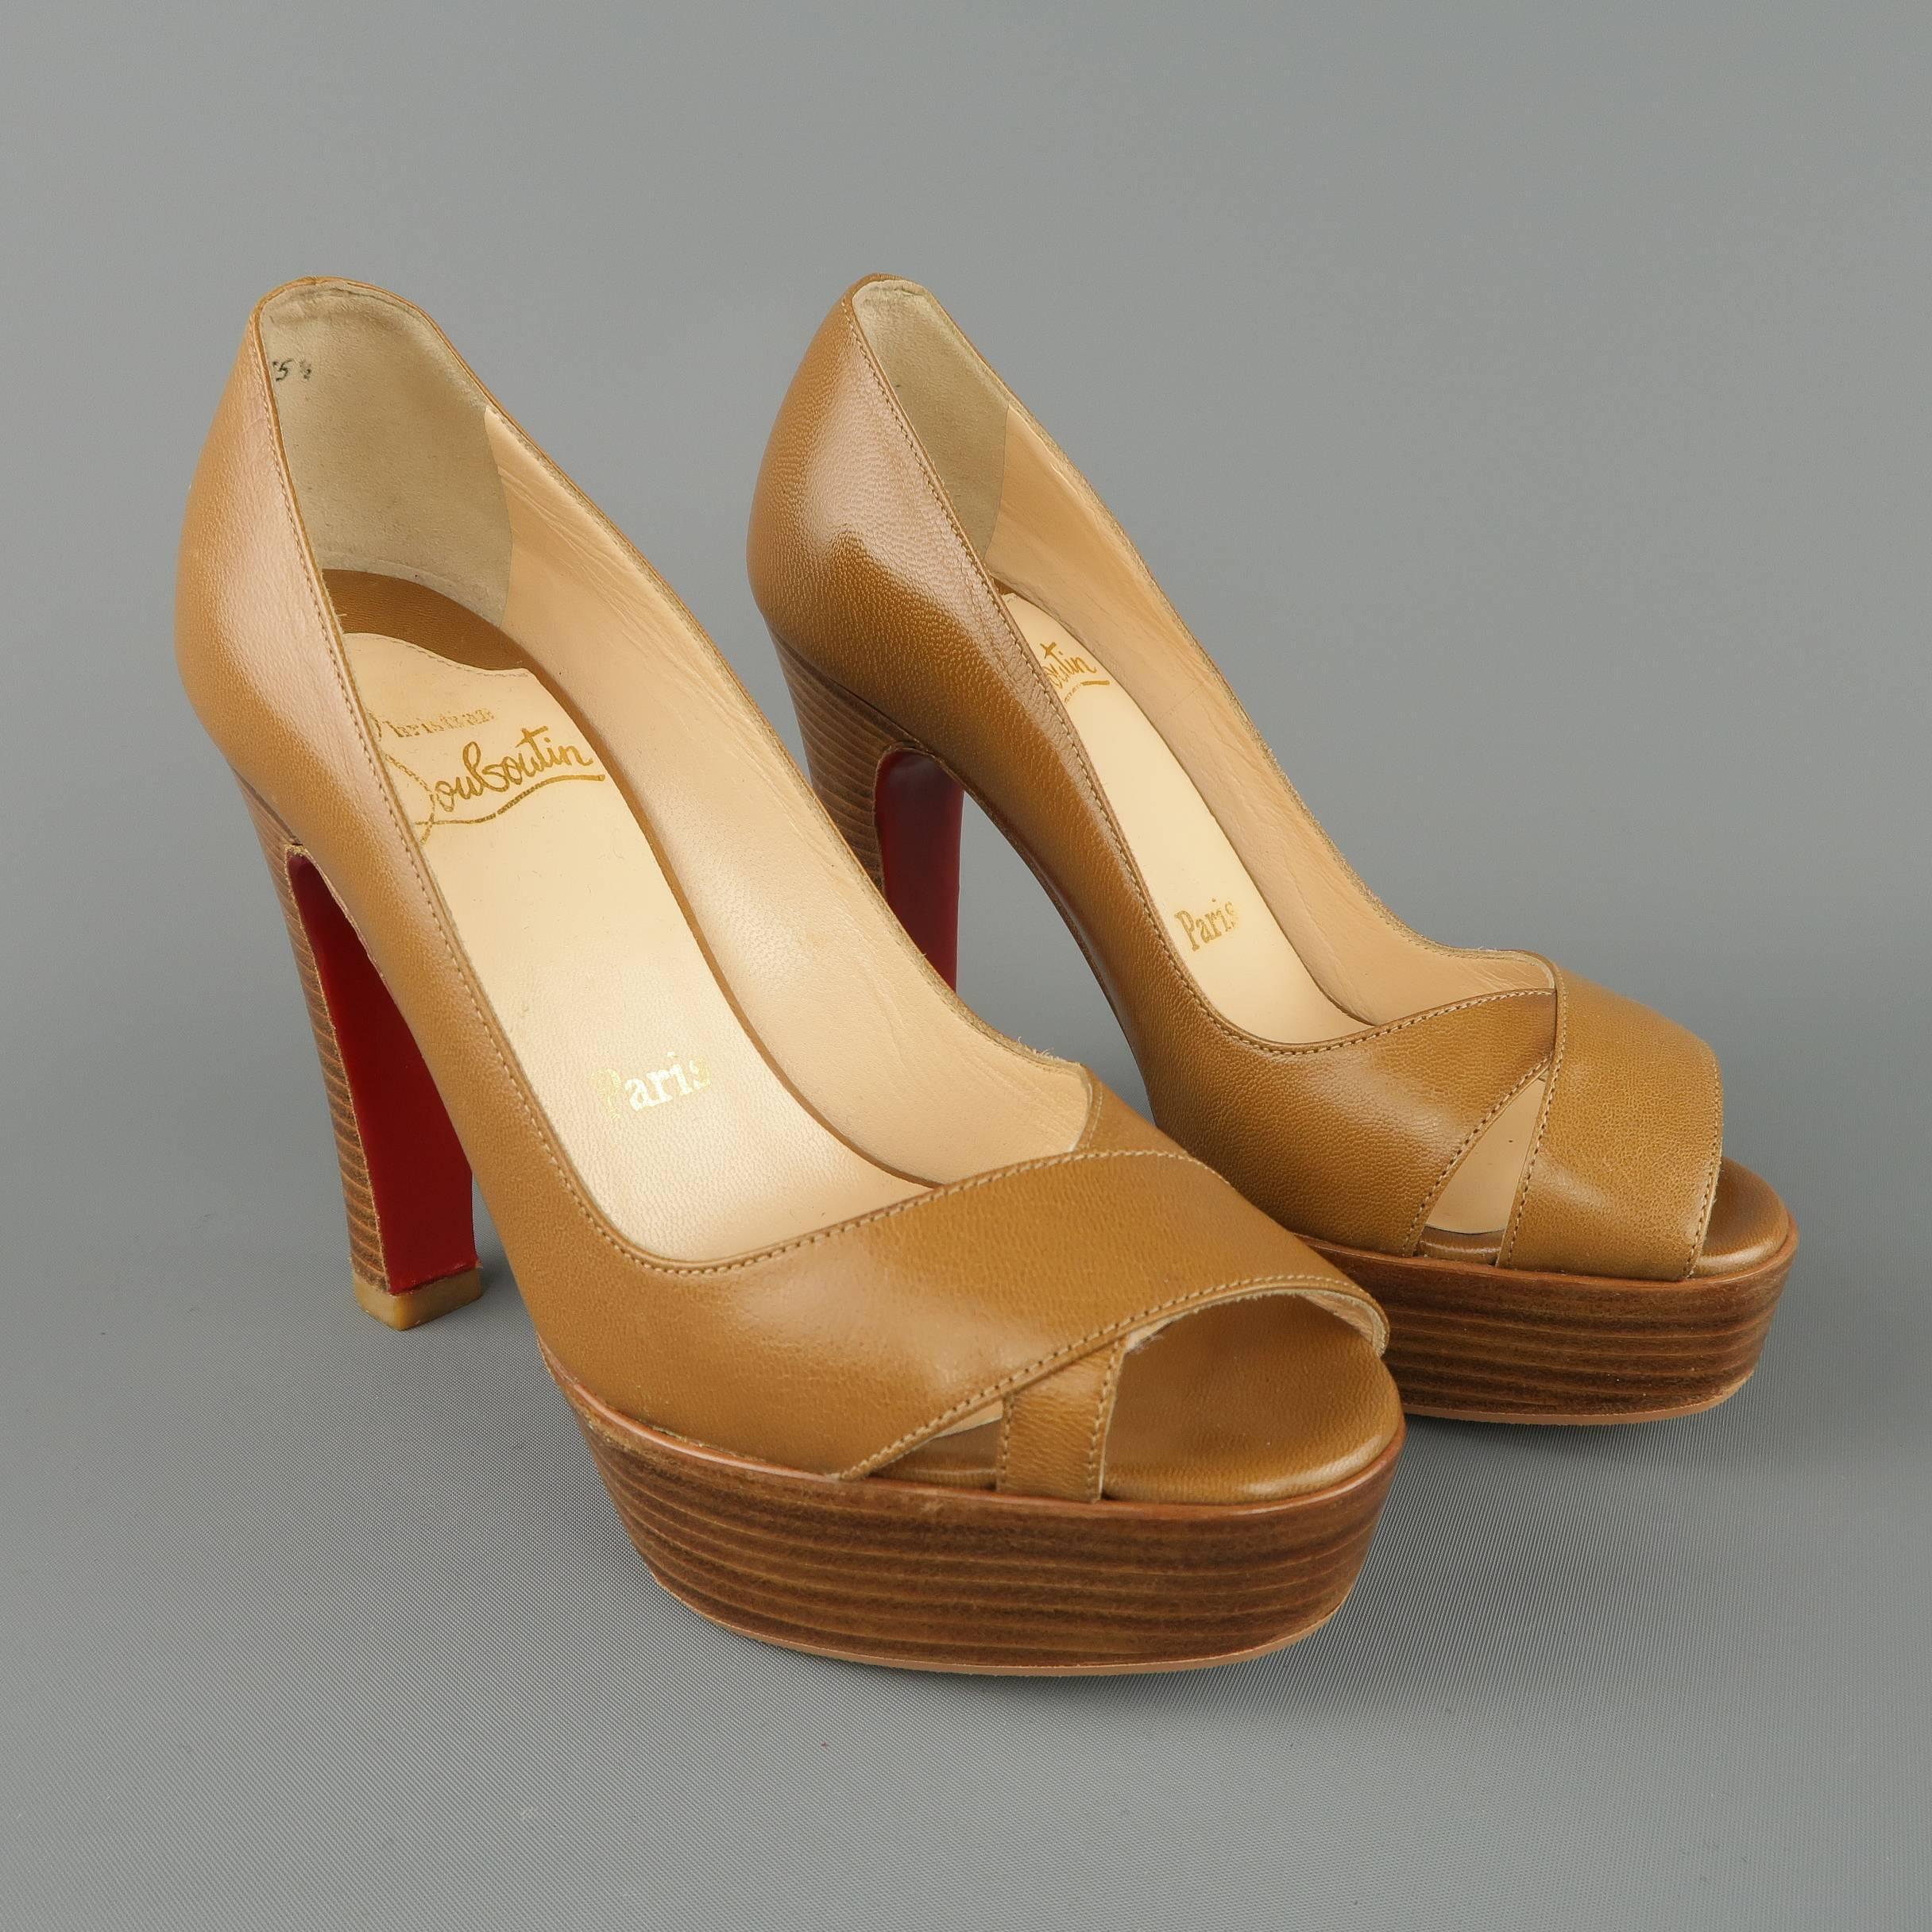 Christian Louboutin pumps come in tan leather with a wrapped peep toe and chunky stacked retro heel platform. Made in Italy.
 
Excellent Pre-Owned Condition.
Marked: IT 35.5
 
Measurements:
 
Heel: 4.45 in.
Platform: 1.25 in.
